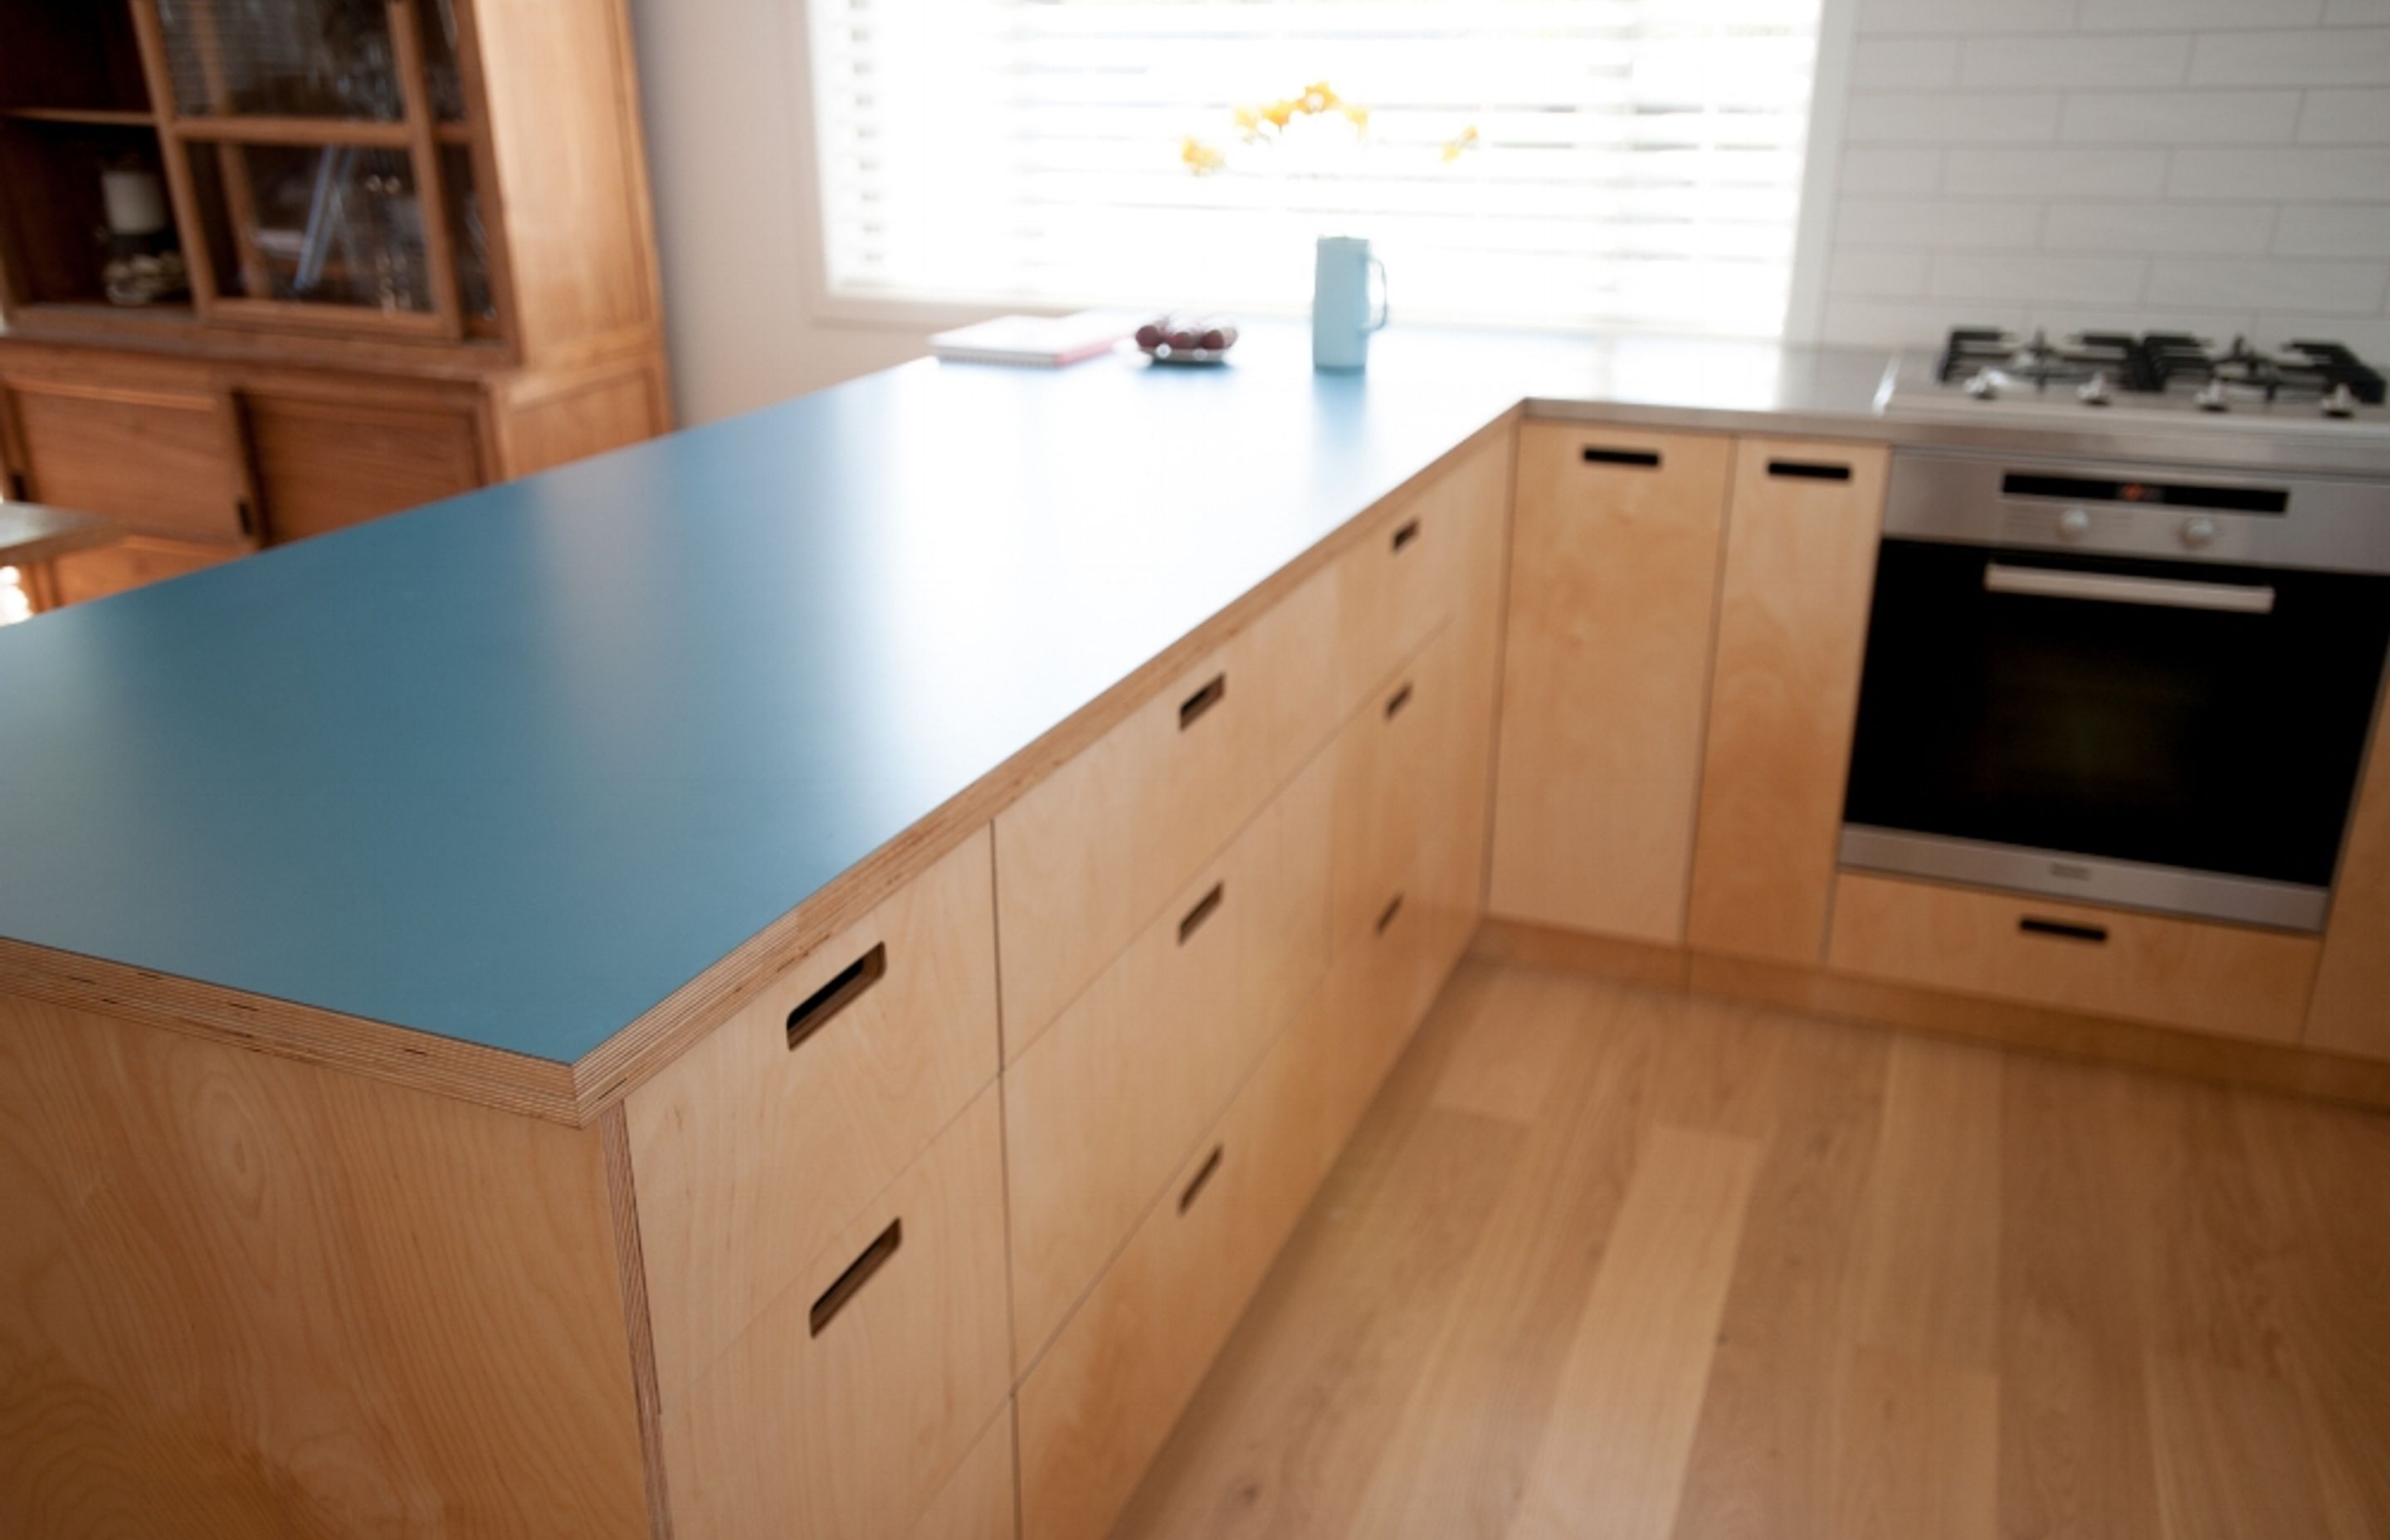 Clear lacquered Birch plywood fronts and spray finished pantry doors compliment a stainless steel bench top and laminated Birch plywood breakfast bar.